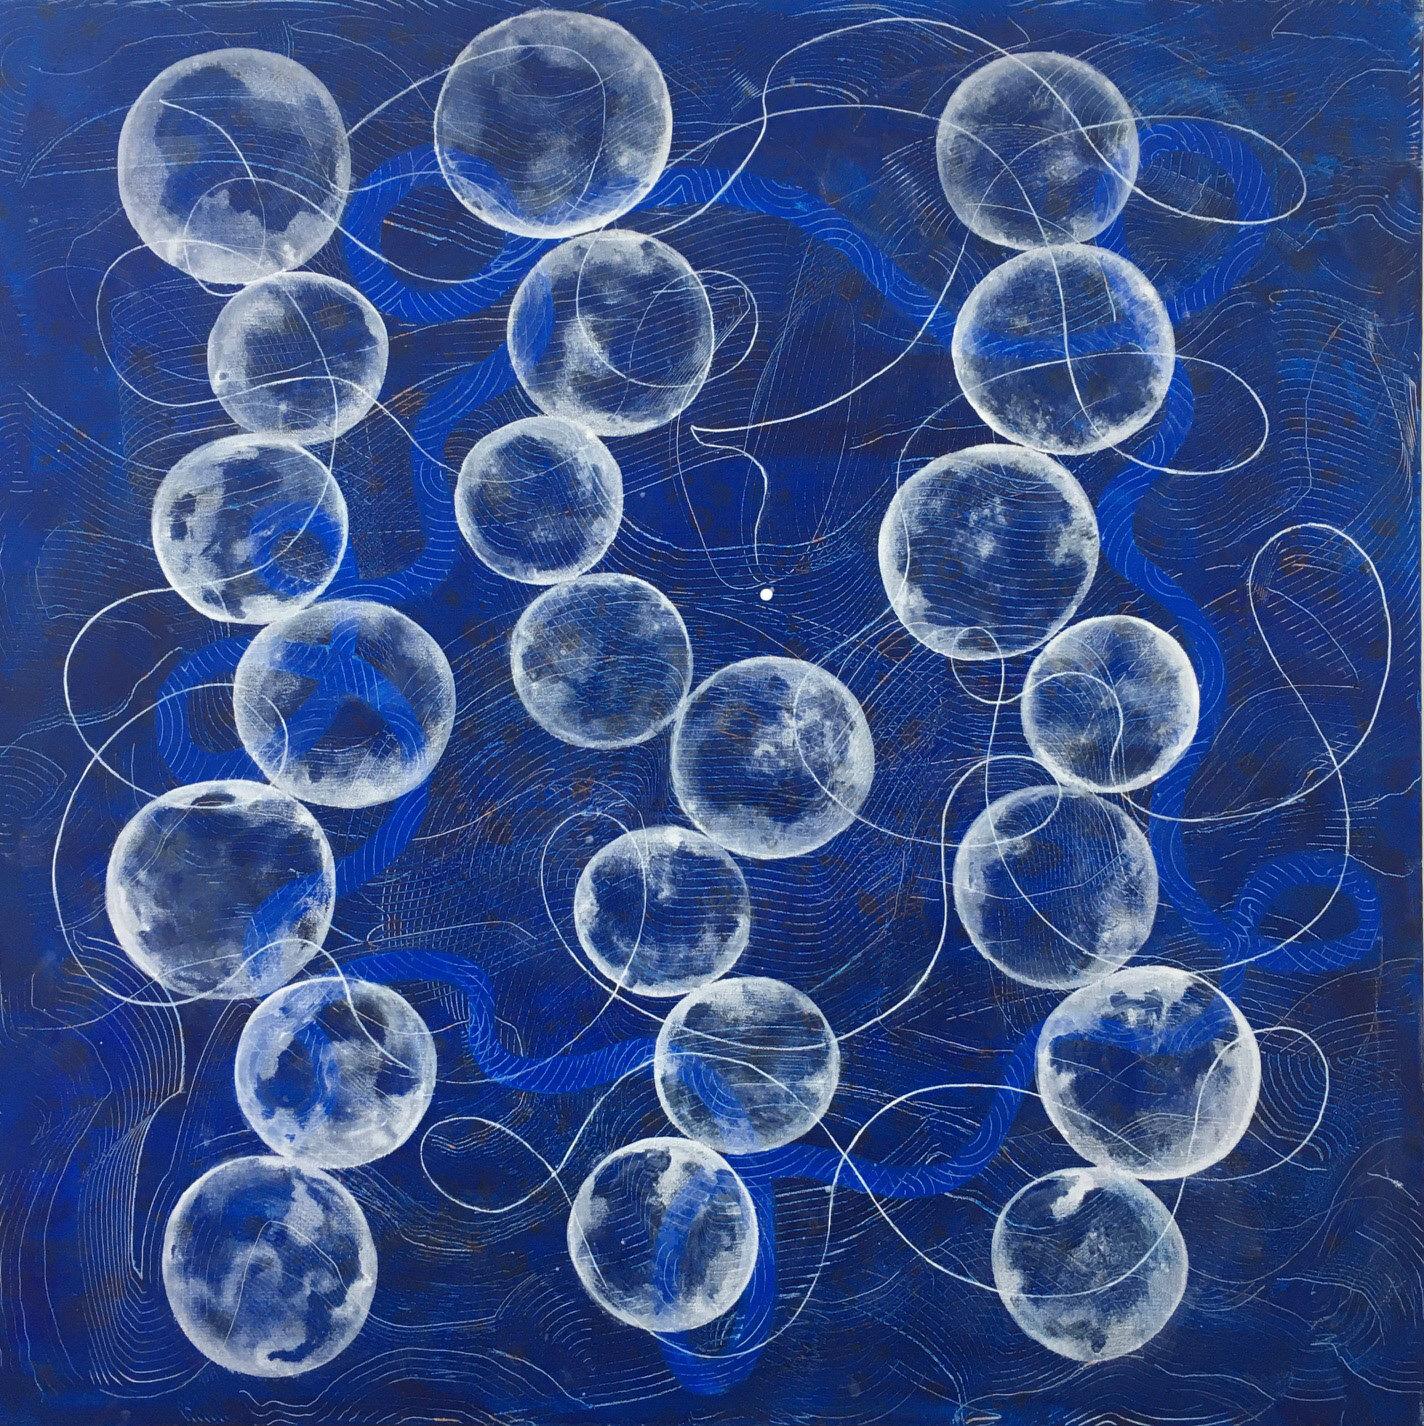 Andra Samelson Abstract Painting - BALANCED II -  Large geometric abstract painting in blue and white 